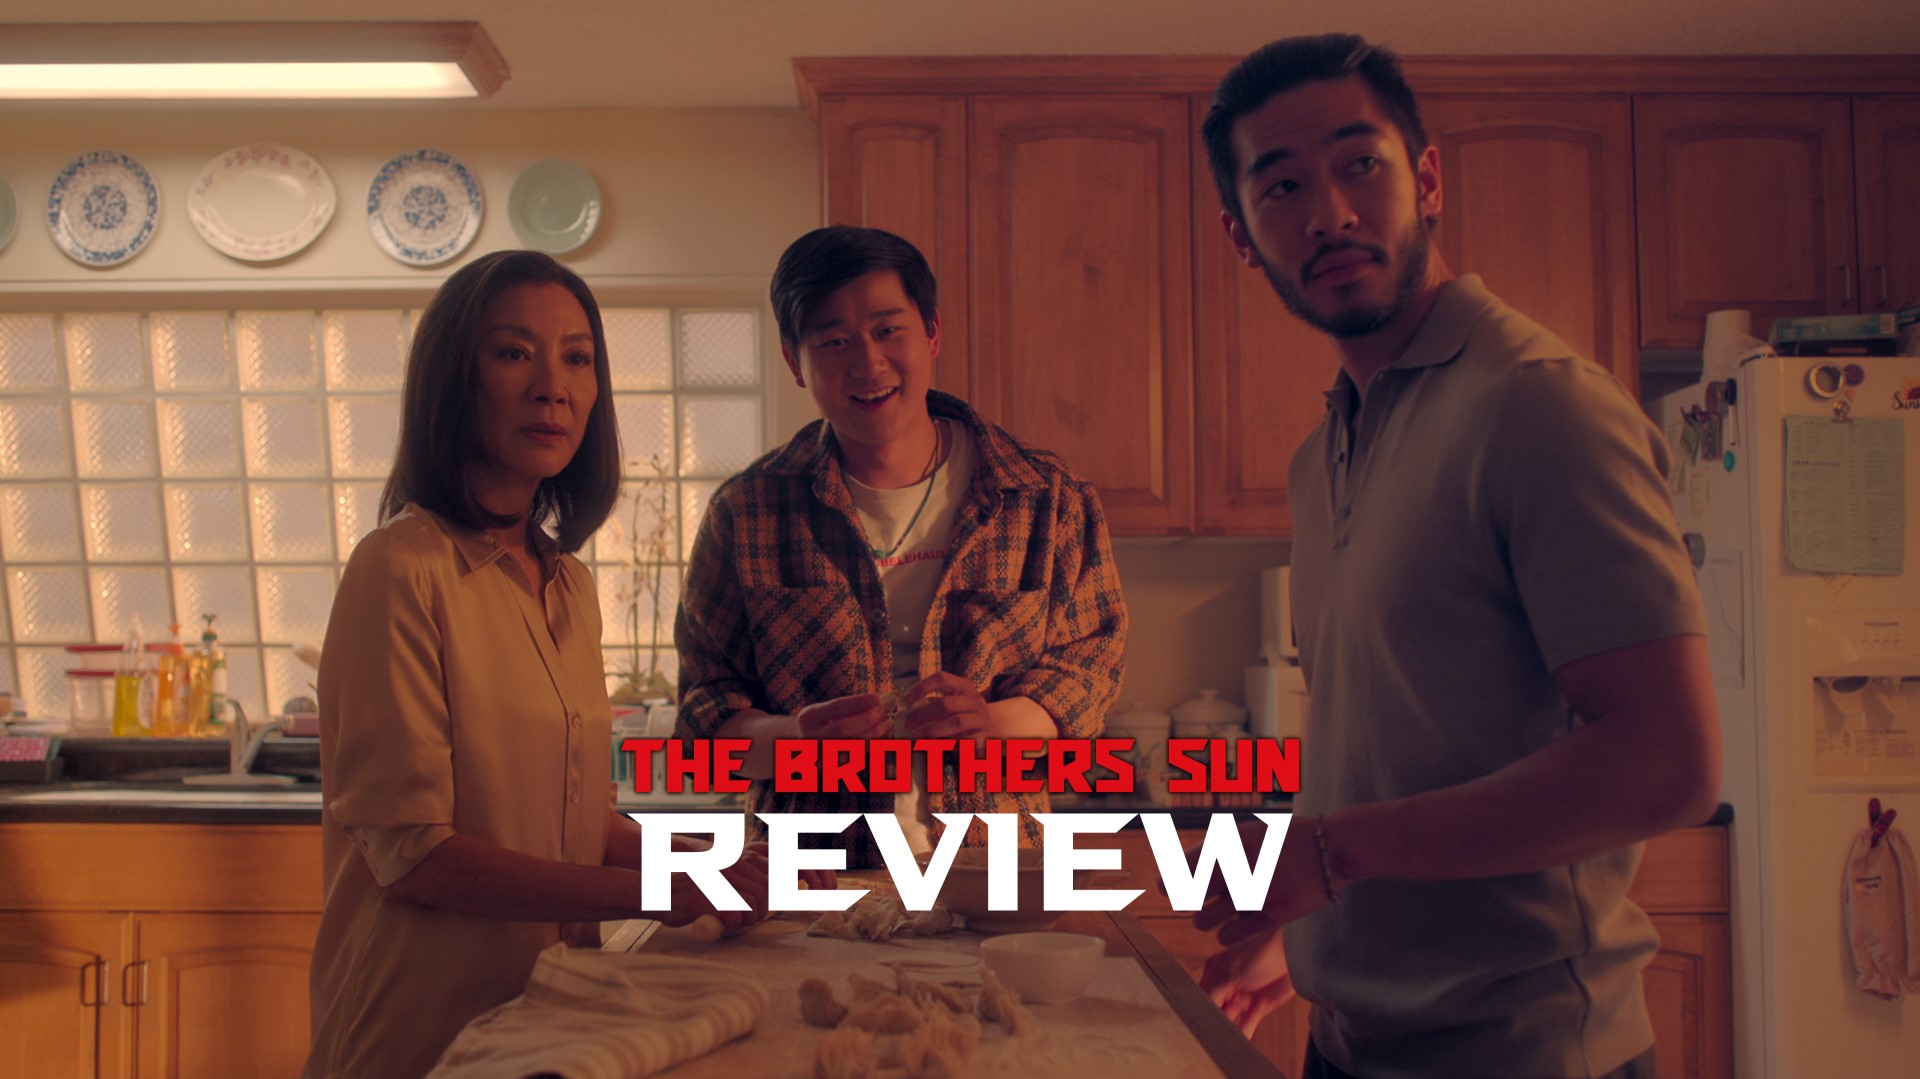 THE BROTHERS SUN Review – The Suns Shine Light on Complex Family Drama with Intense Action and Hard-Hitting Comedy